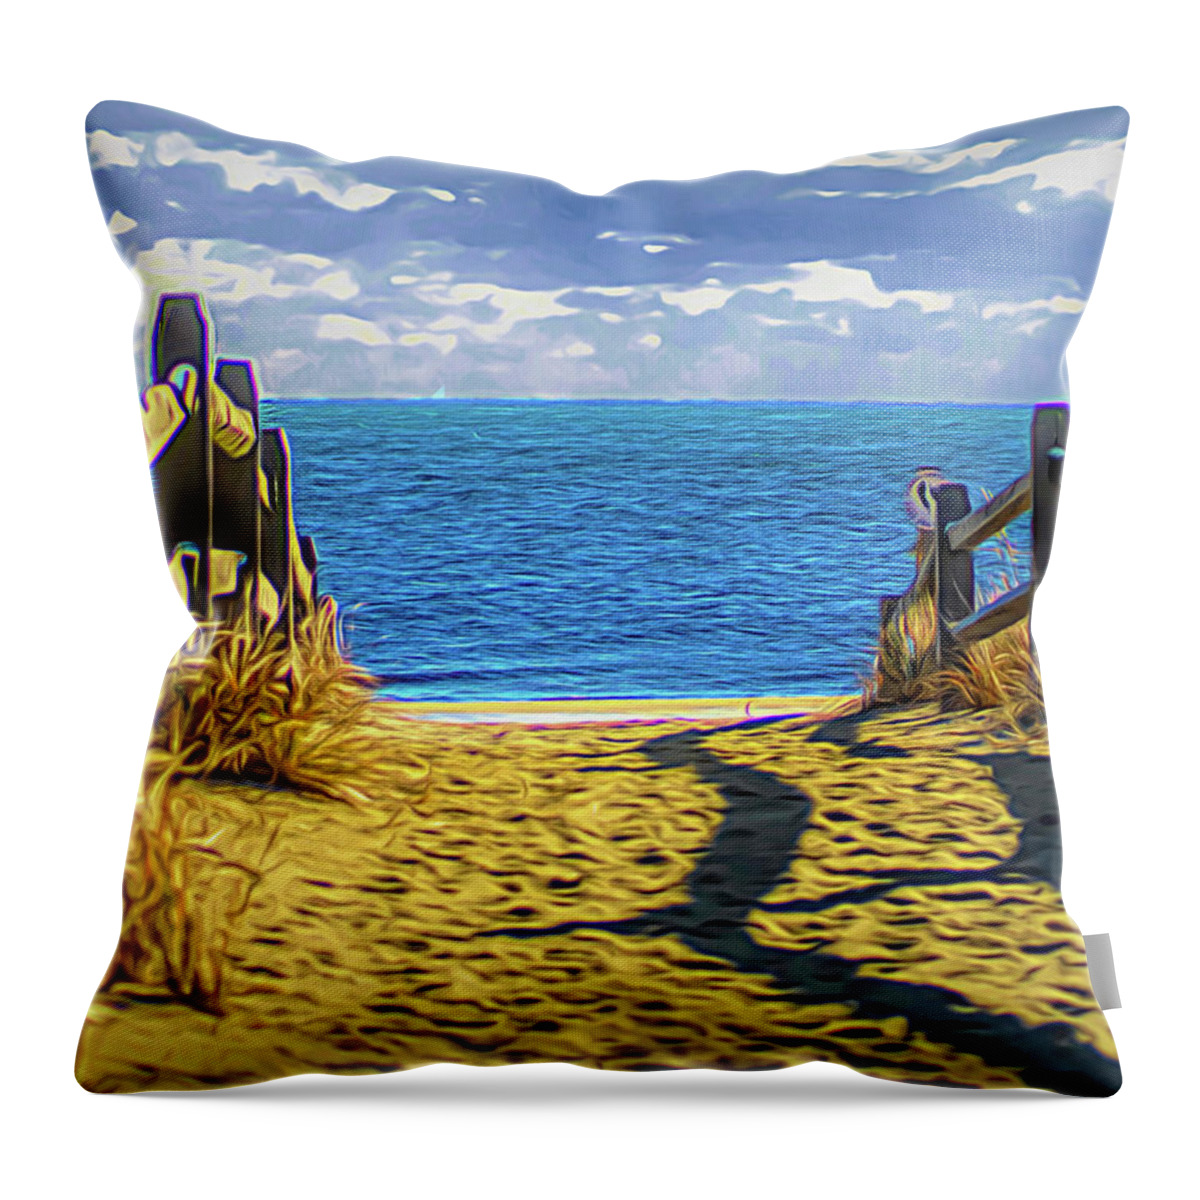 Atlantic Throw Pillow featuring the digital art Path To Peace by M Three Photos